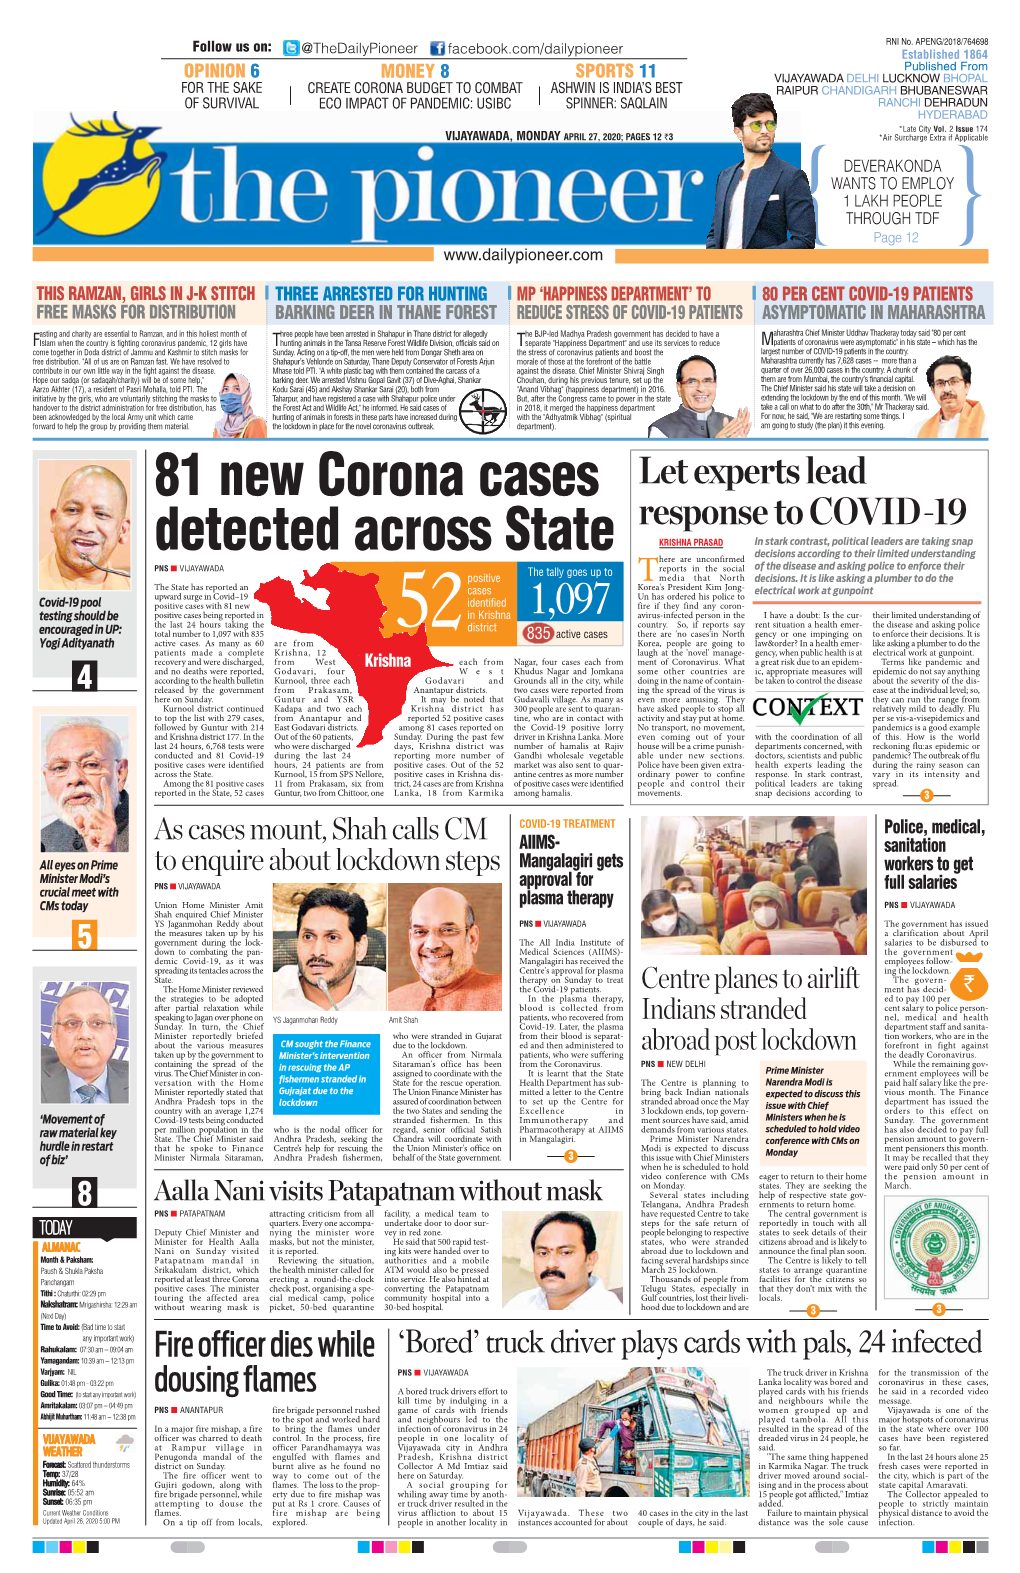 81 New Corona Cases Detected Across State